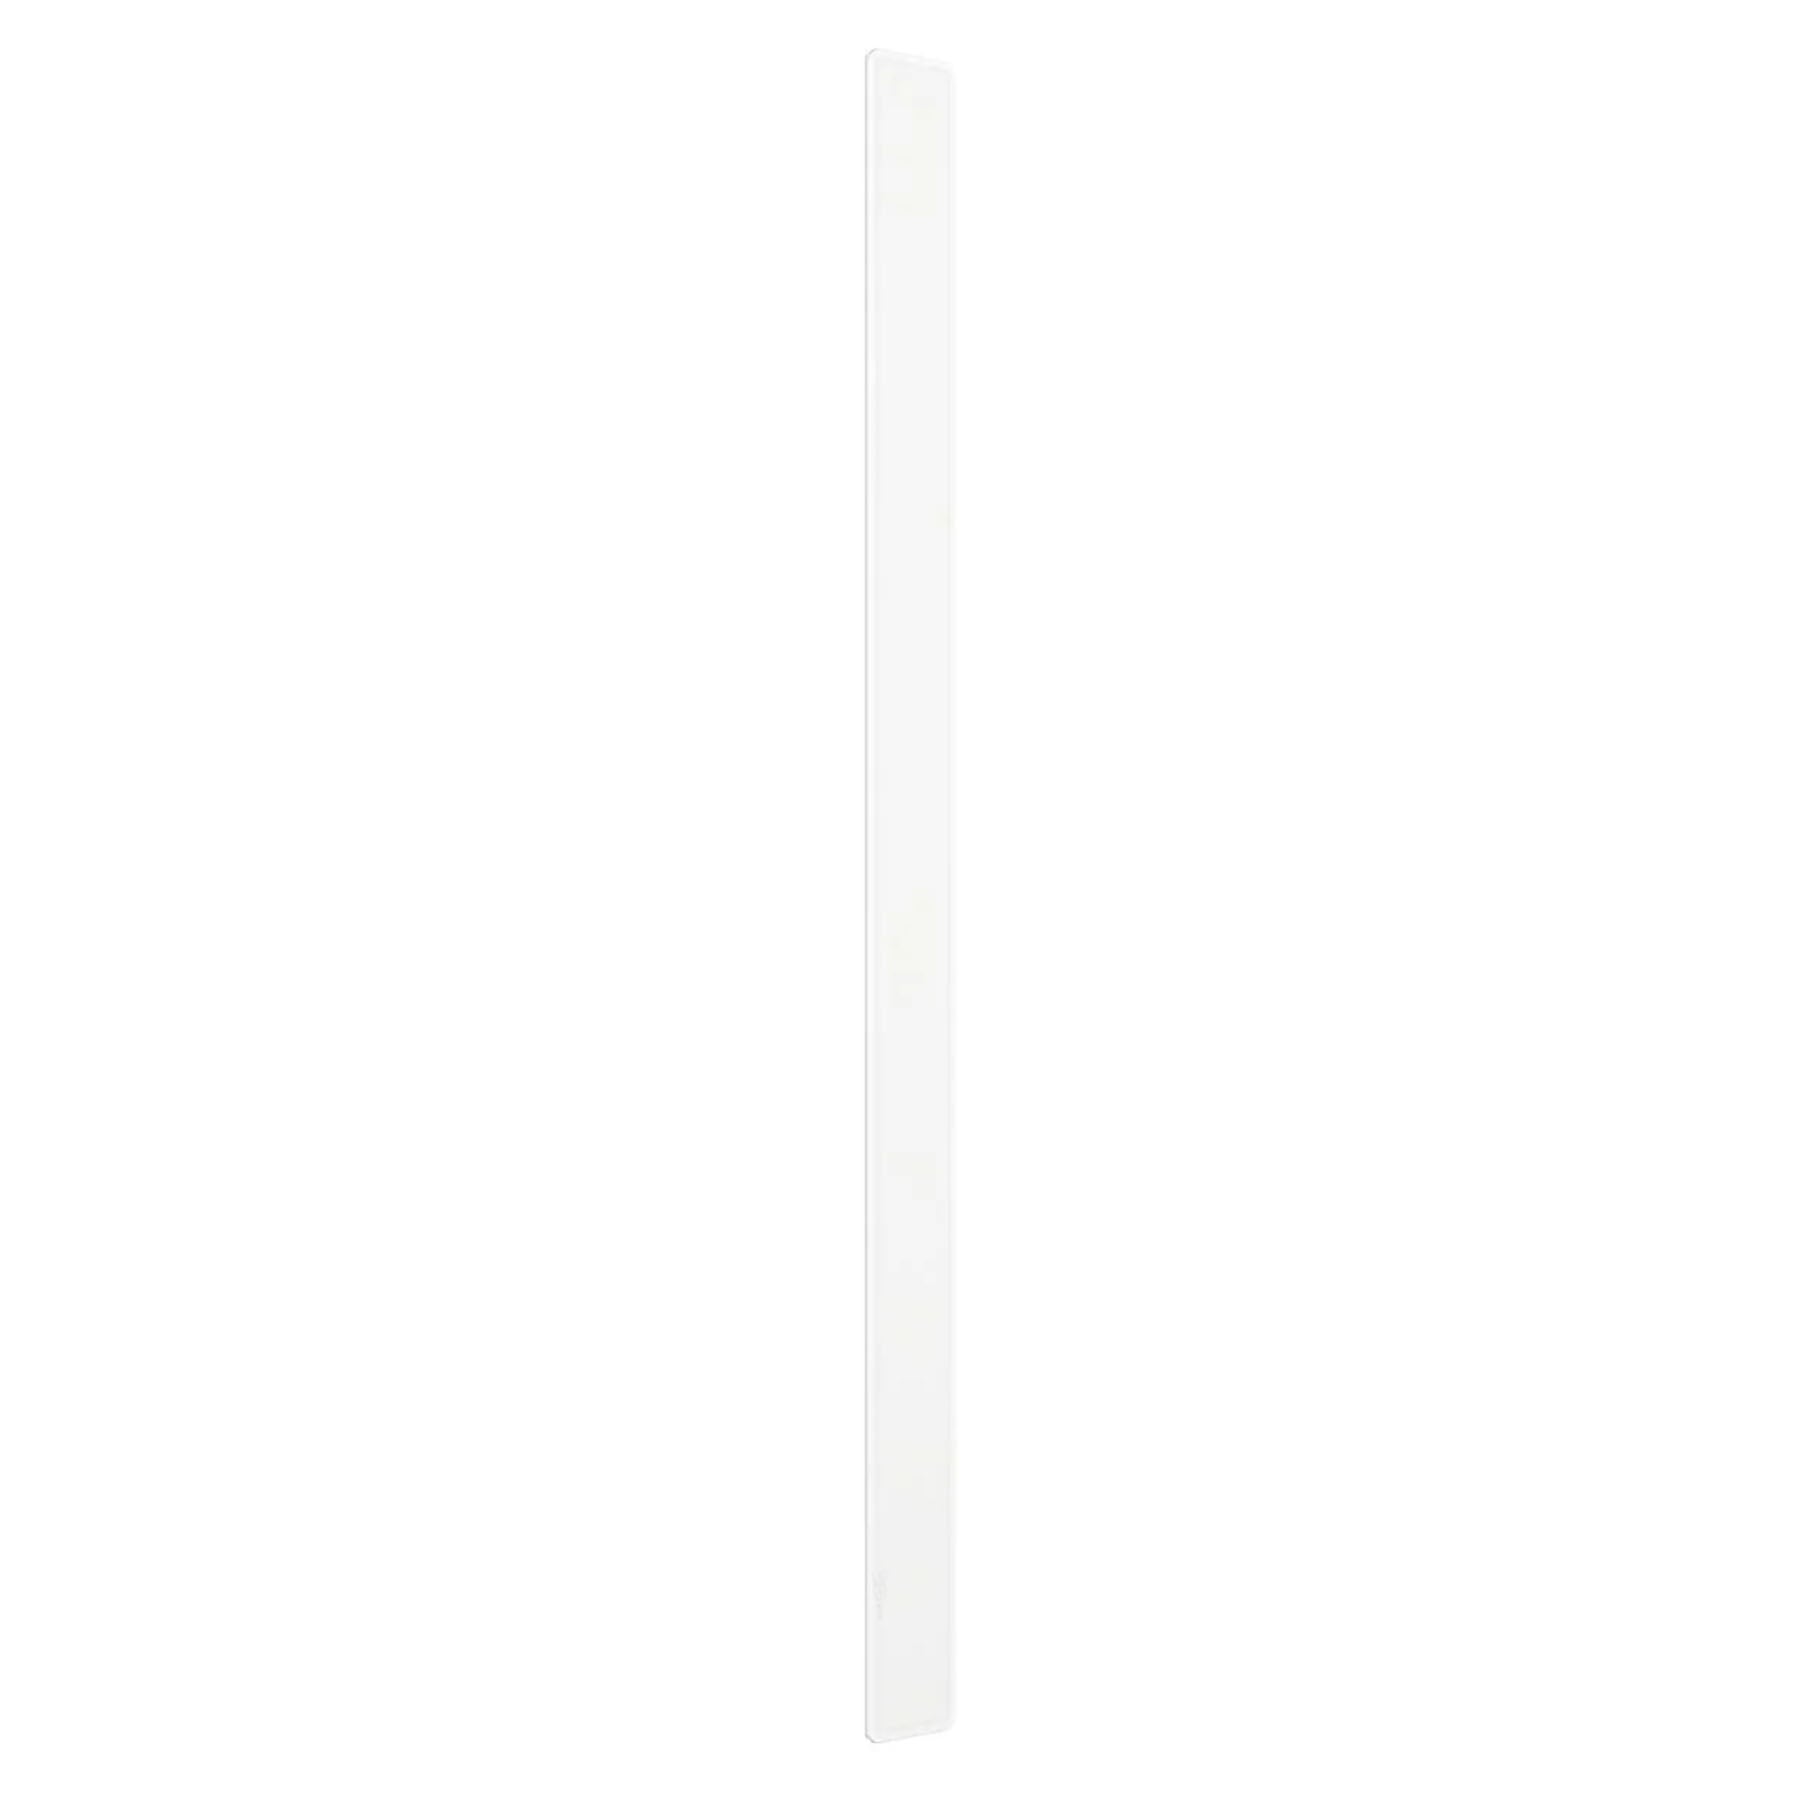 Vogel's TVA 6000 Cable Cover (white)